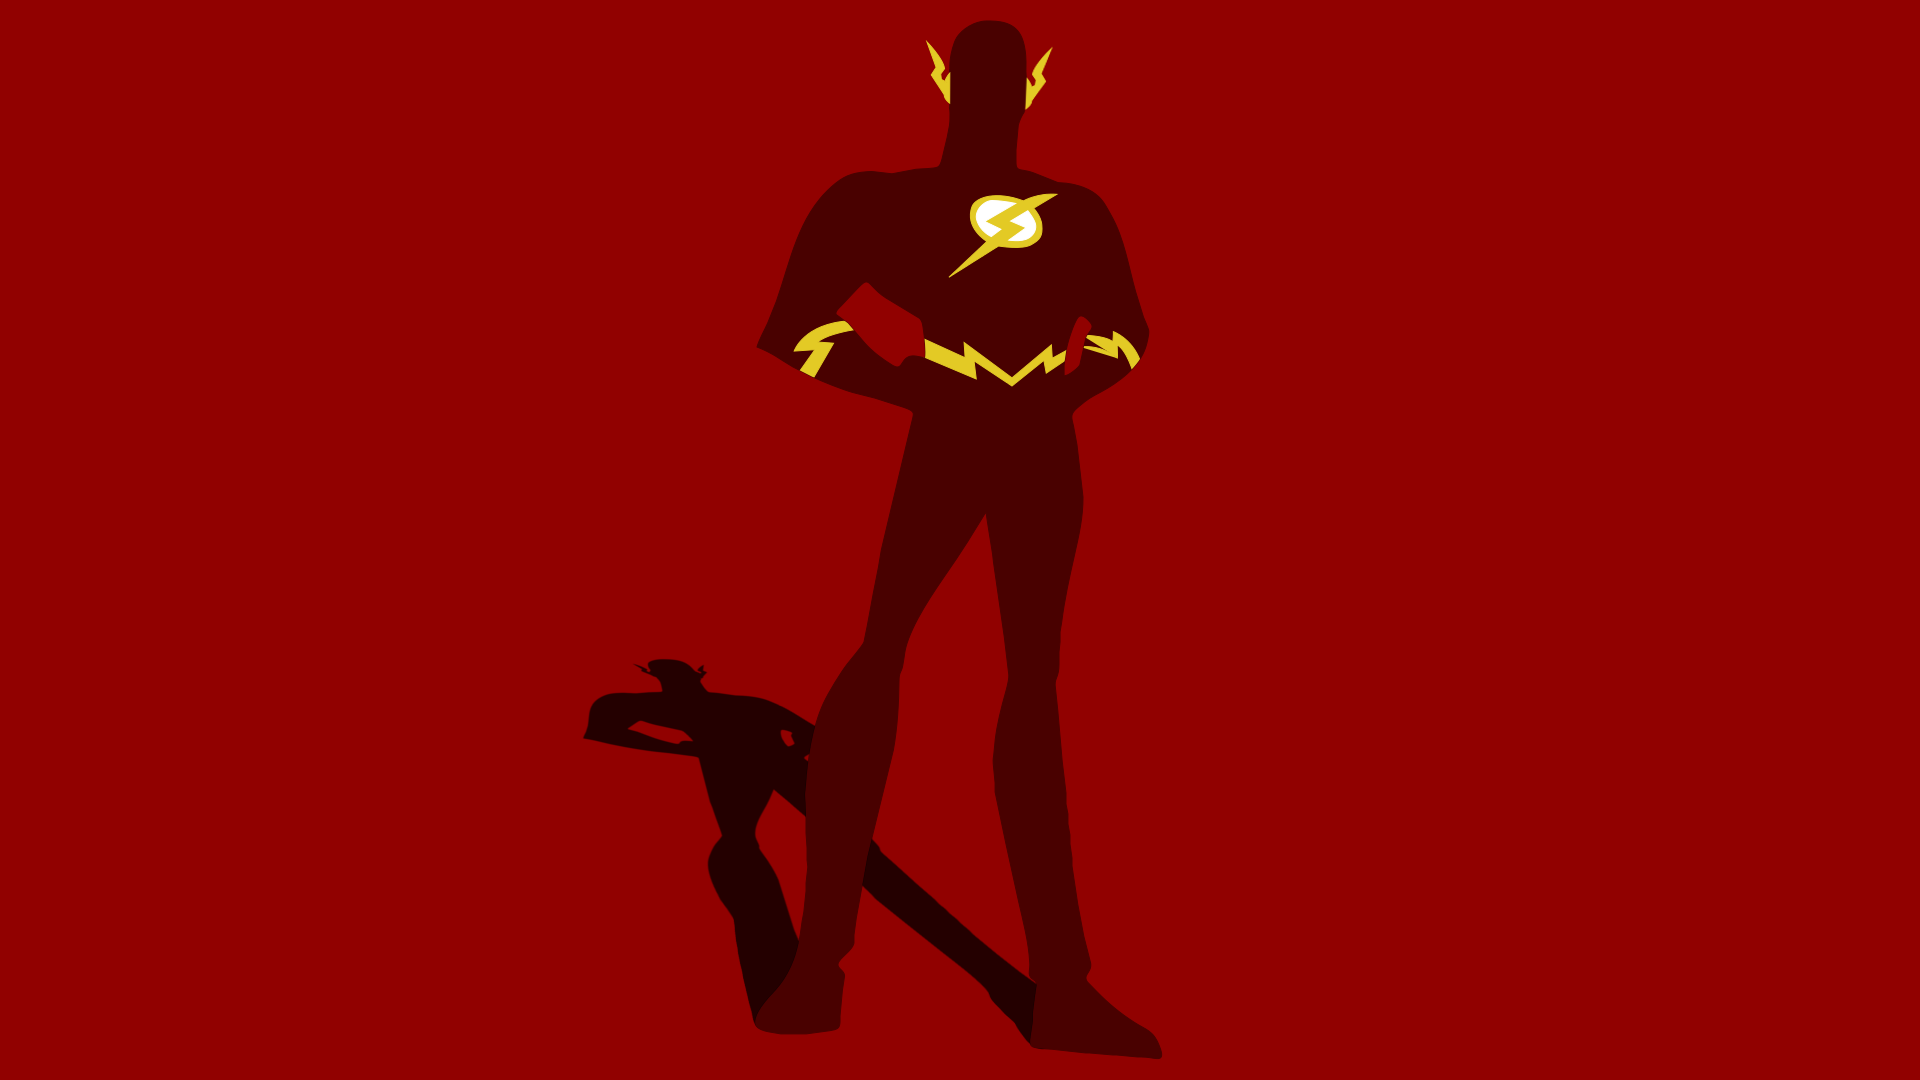 The Flash Cool Wallpapers HD - Free Wallpaper Page